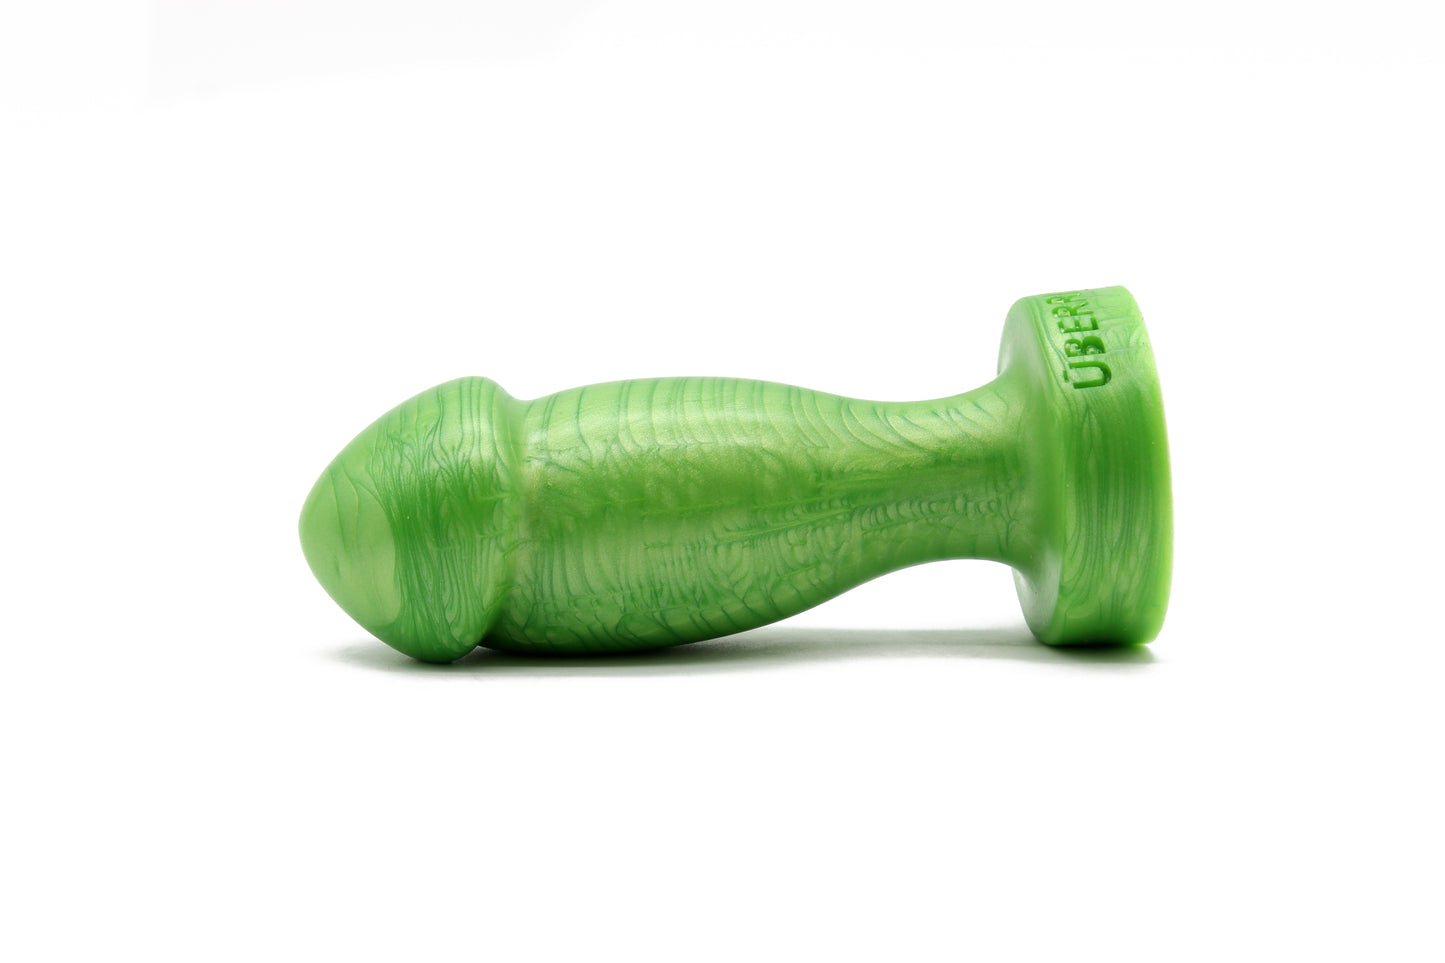 The Sentio Squishy Vaginal and or Butt Plug